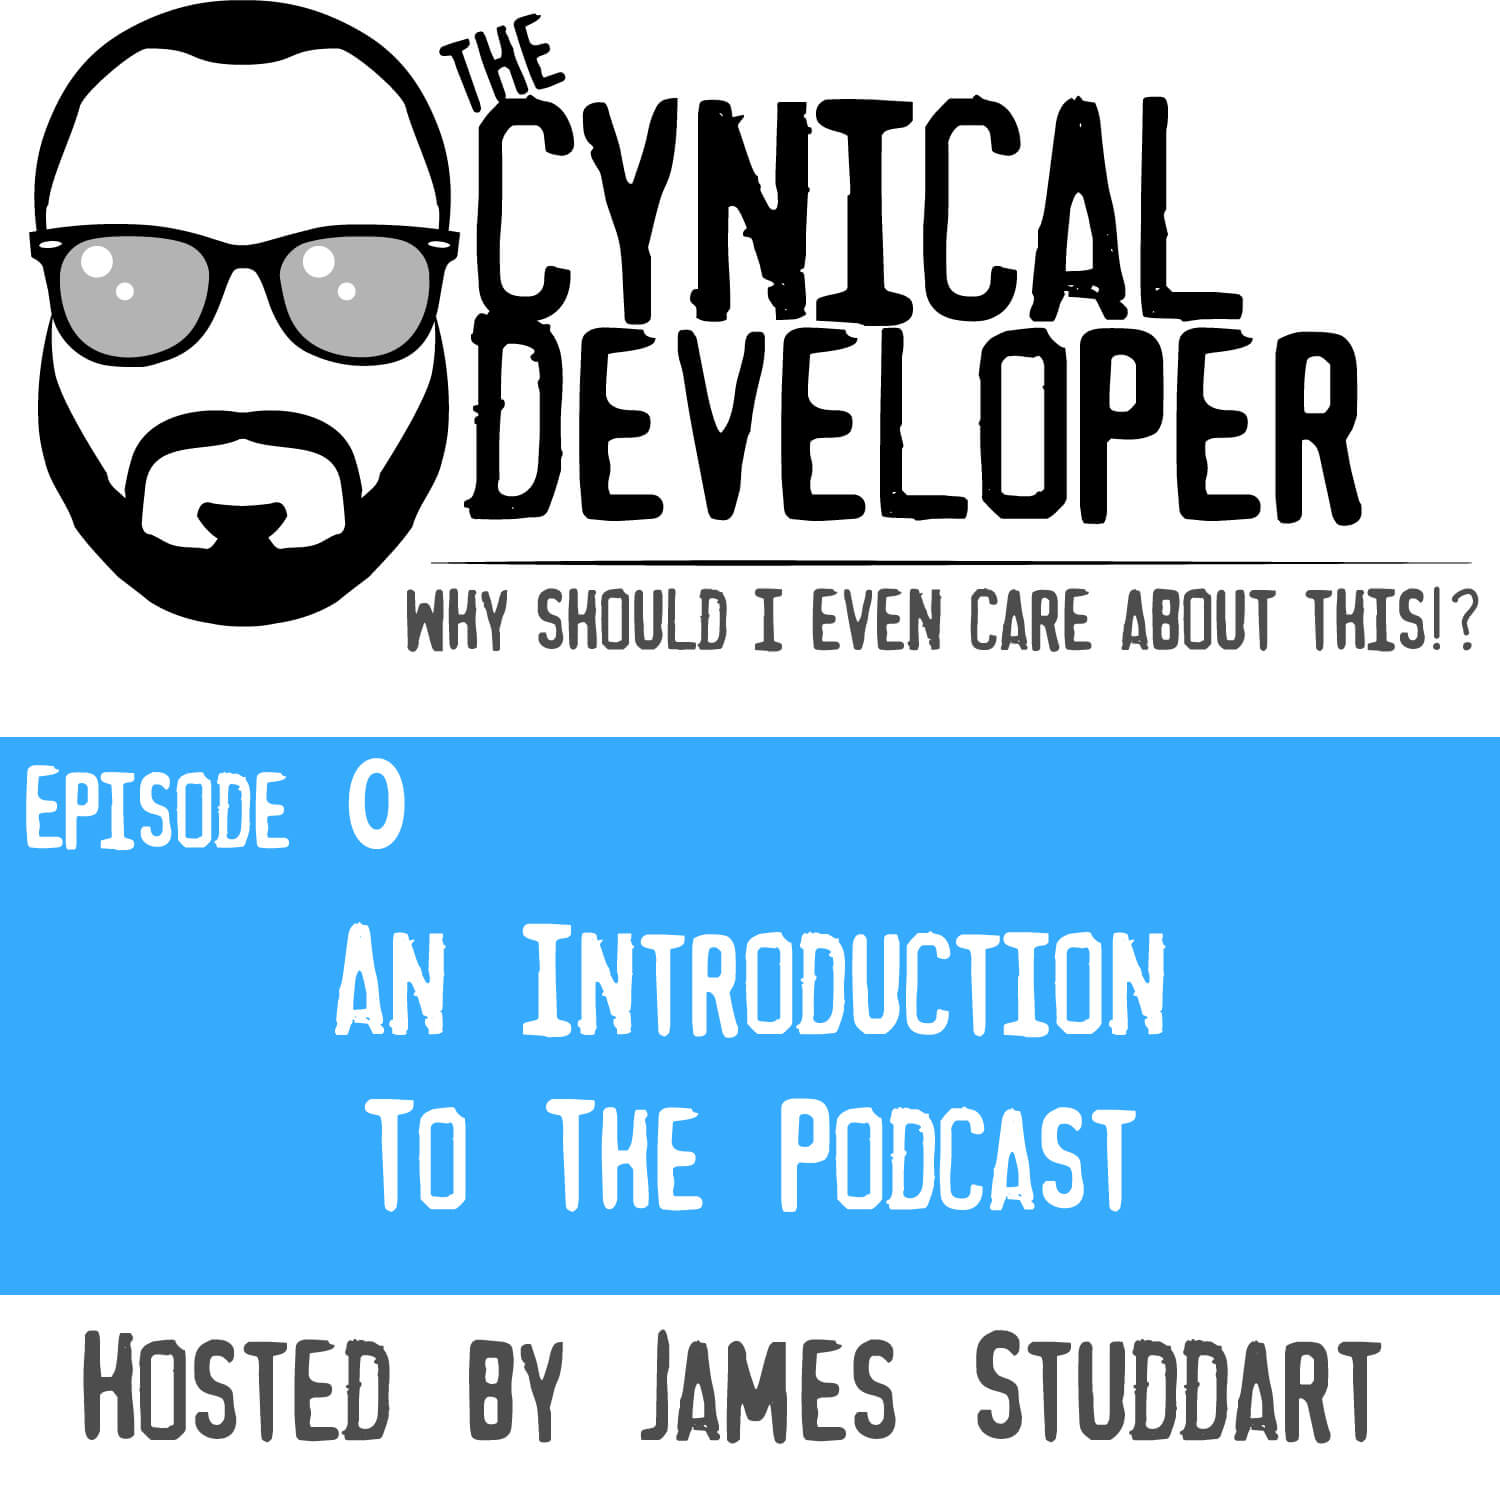 Episode 0 - Welcome to the Cynical Developer